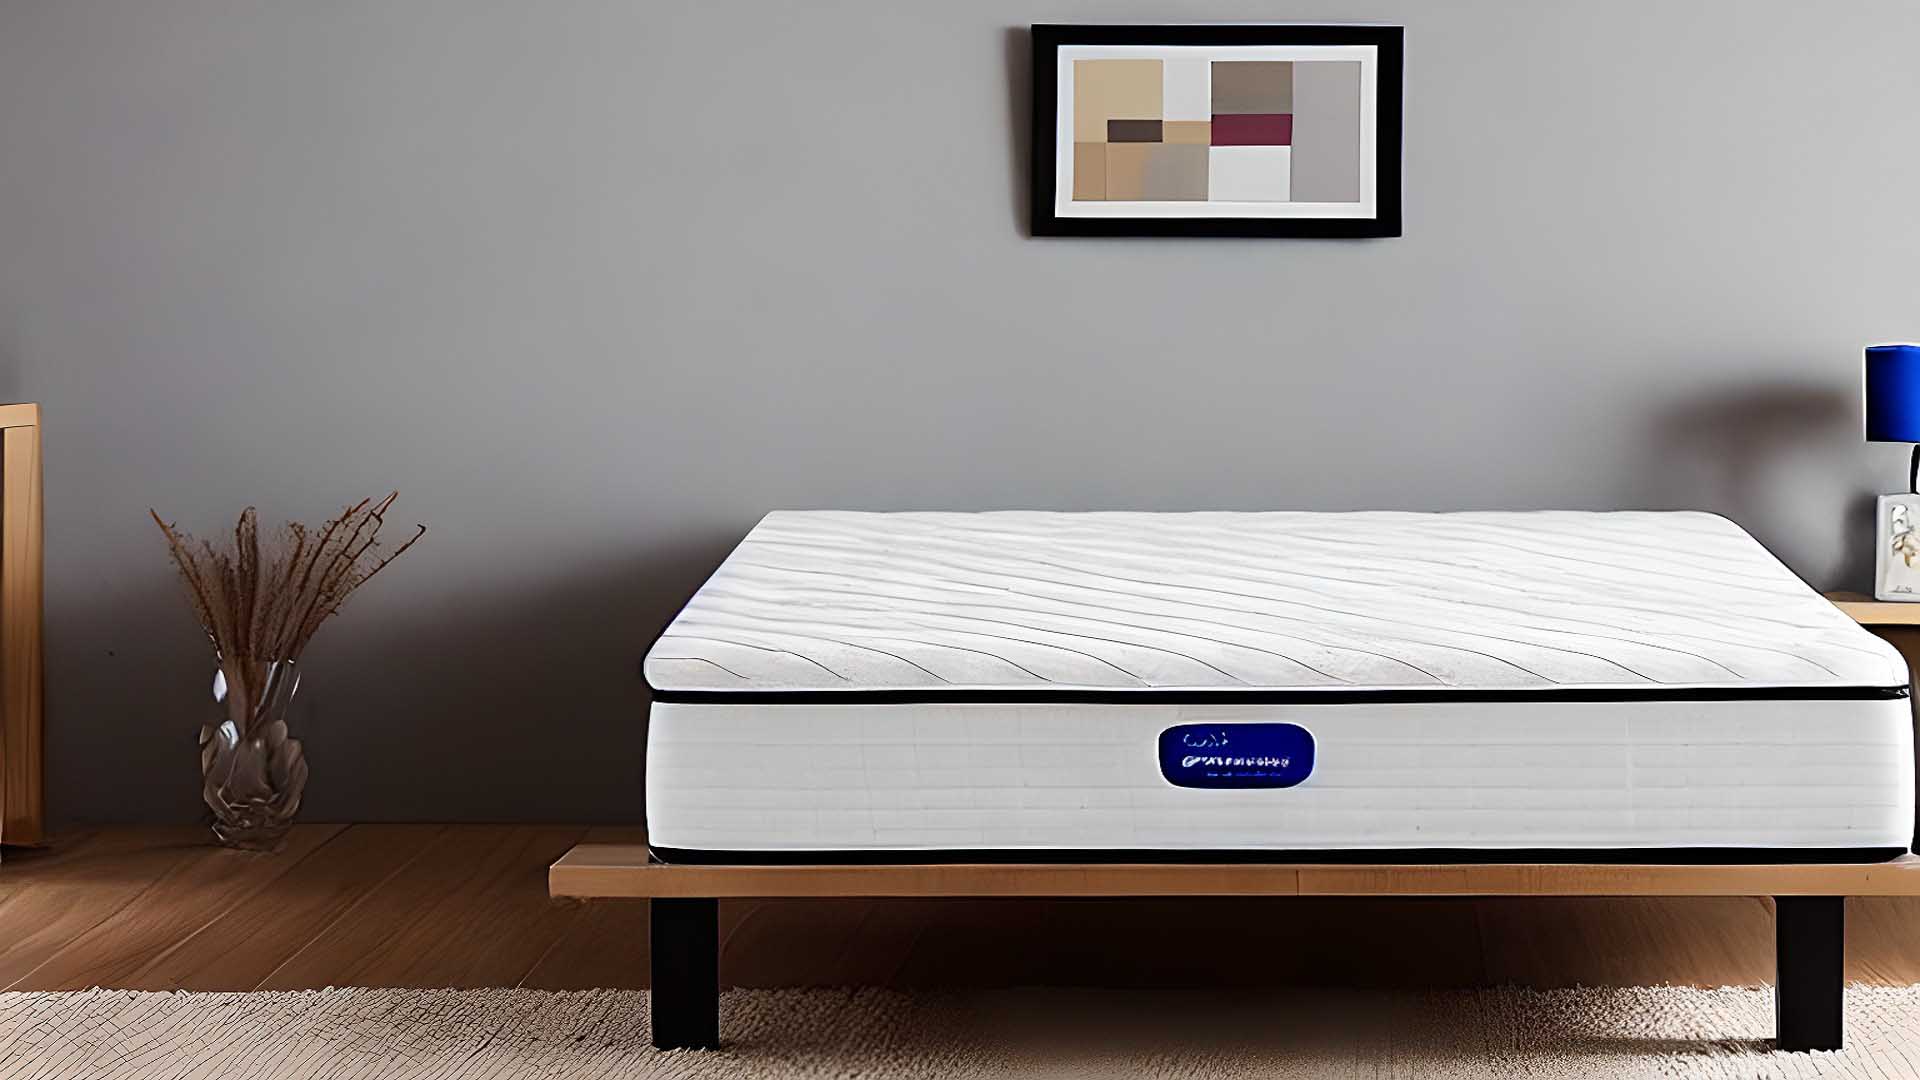 Mattress Sales & Deals in White Plains, NY